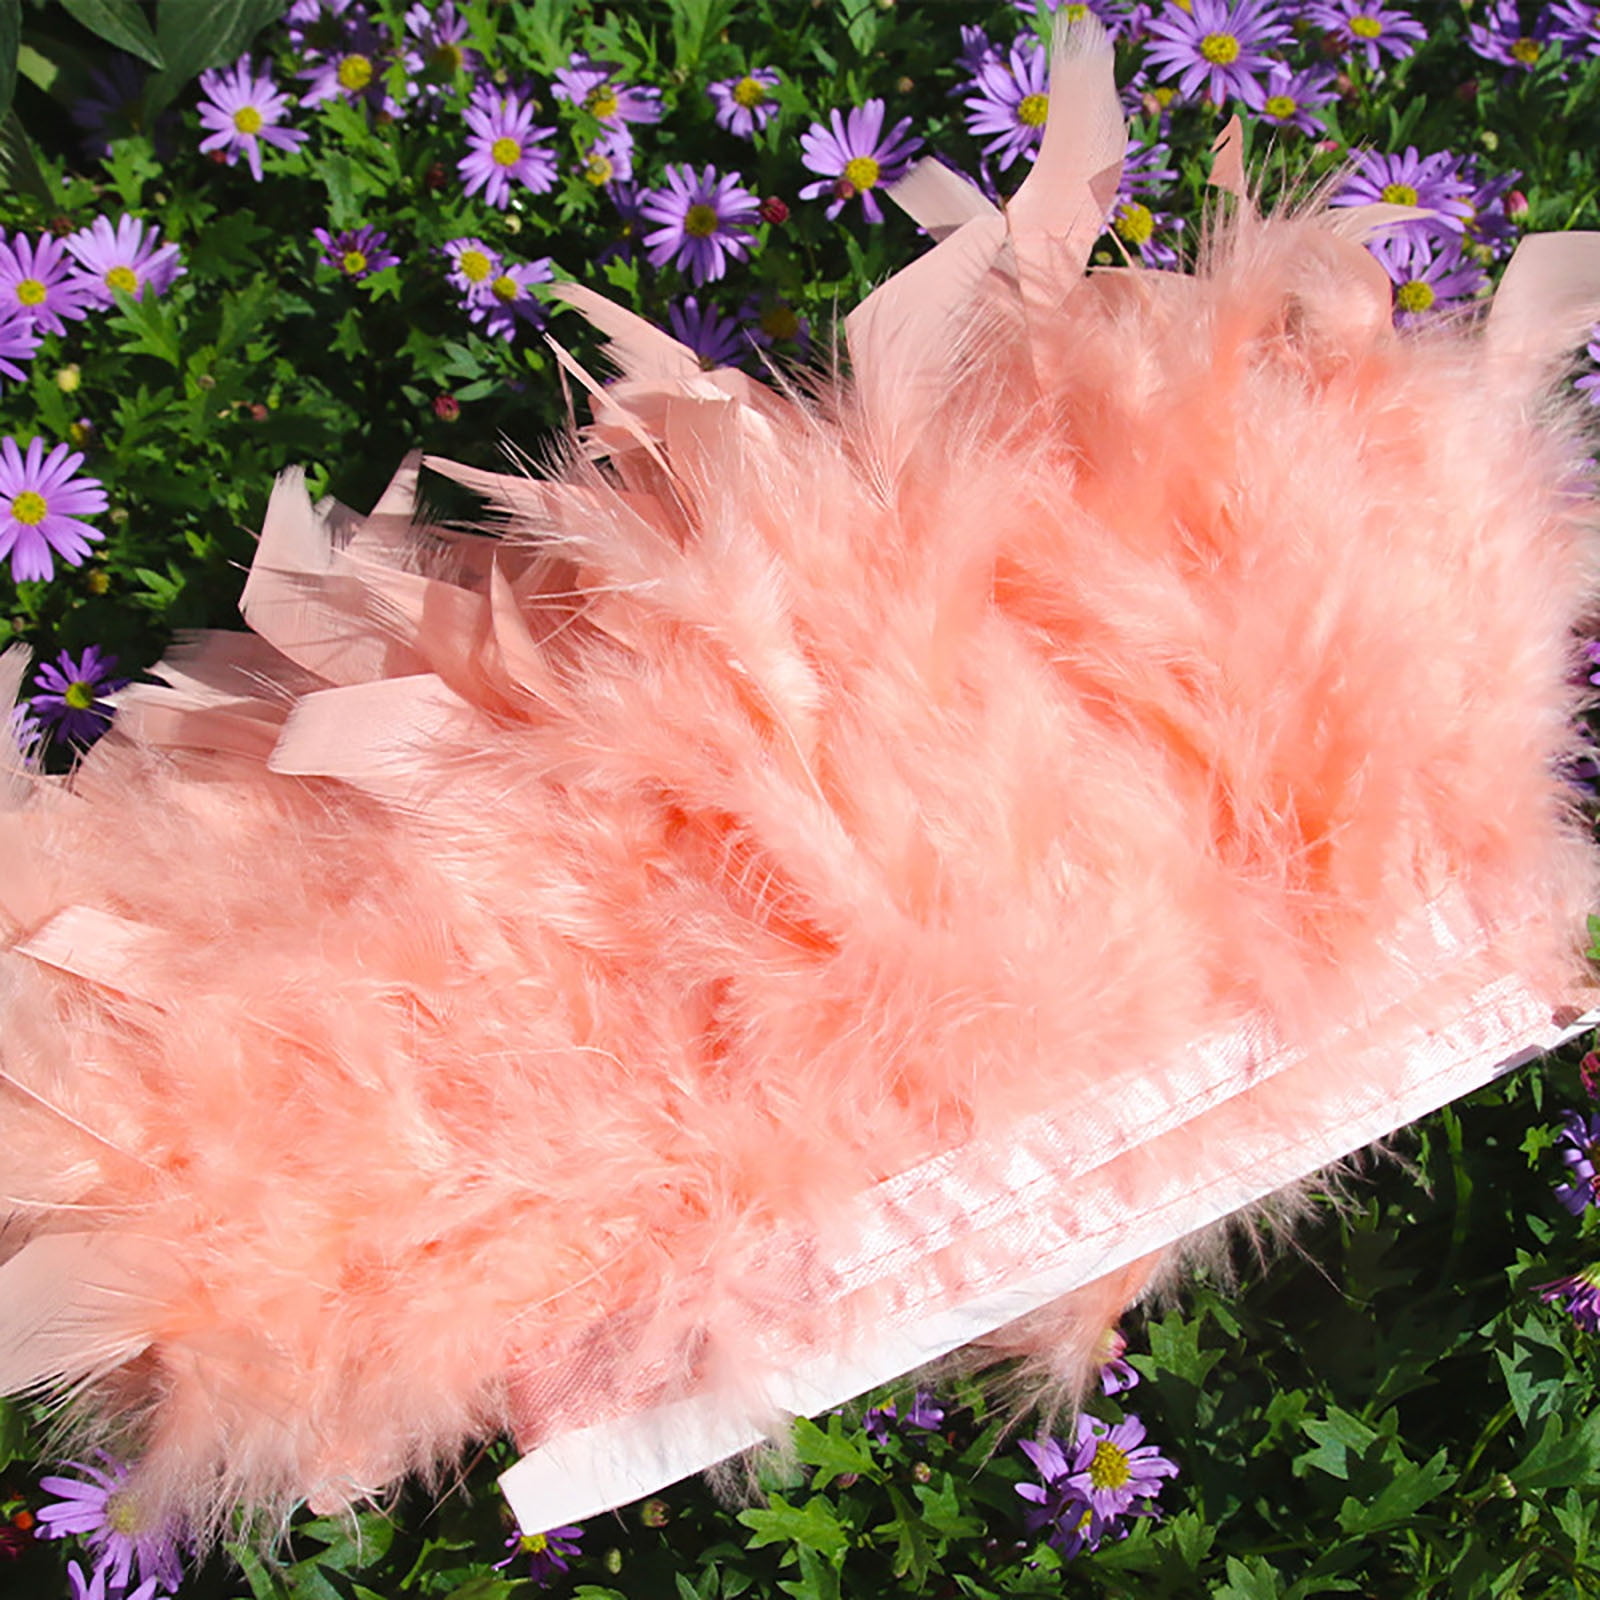 2g Craft Feathers: Pink